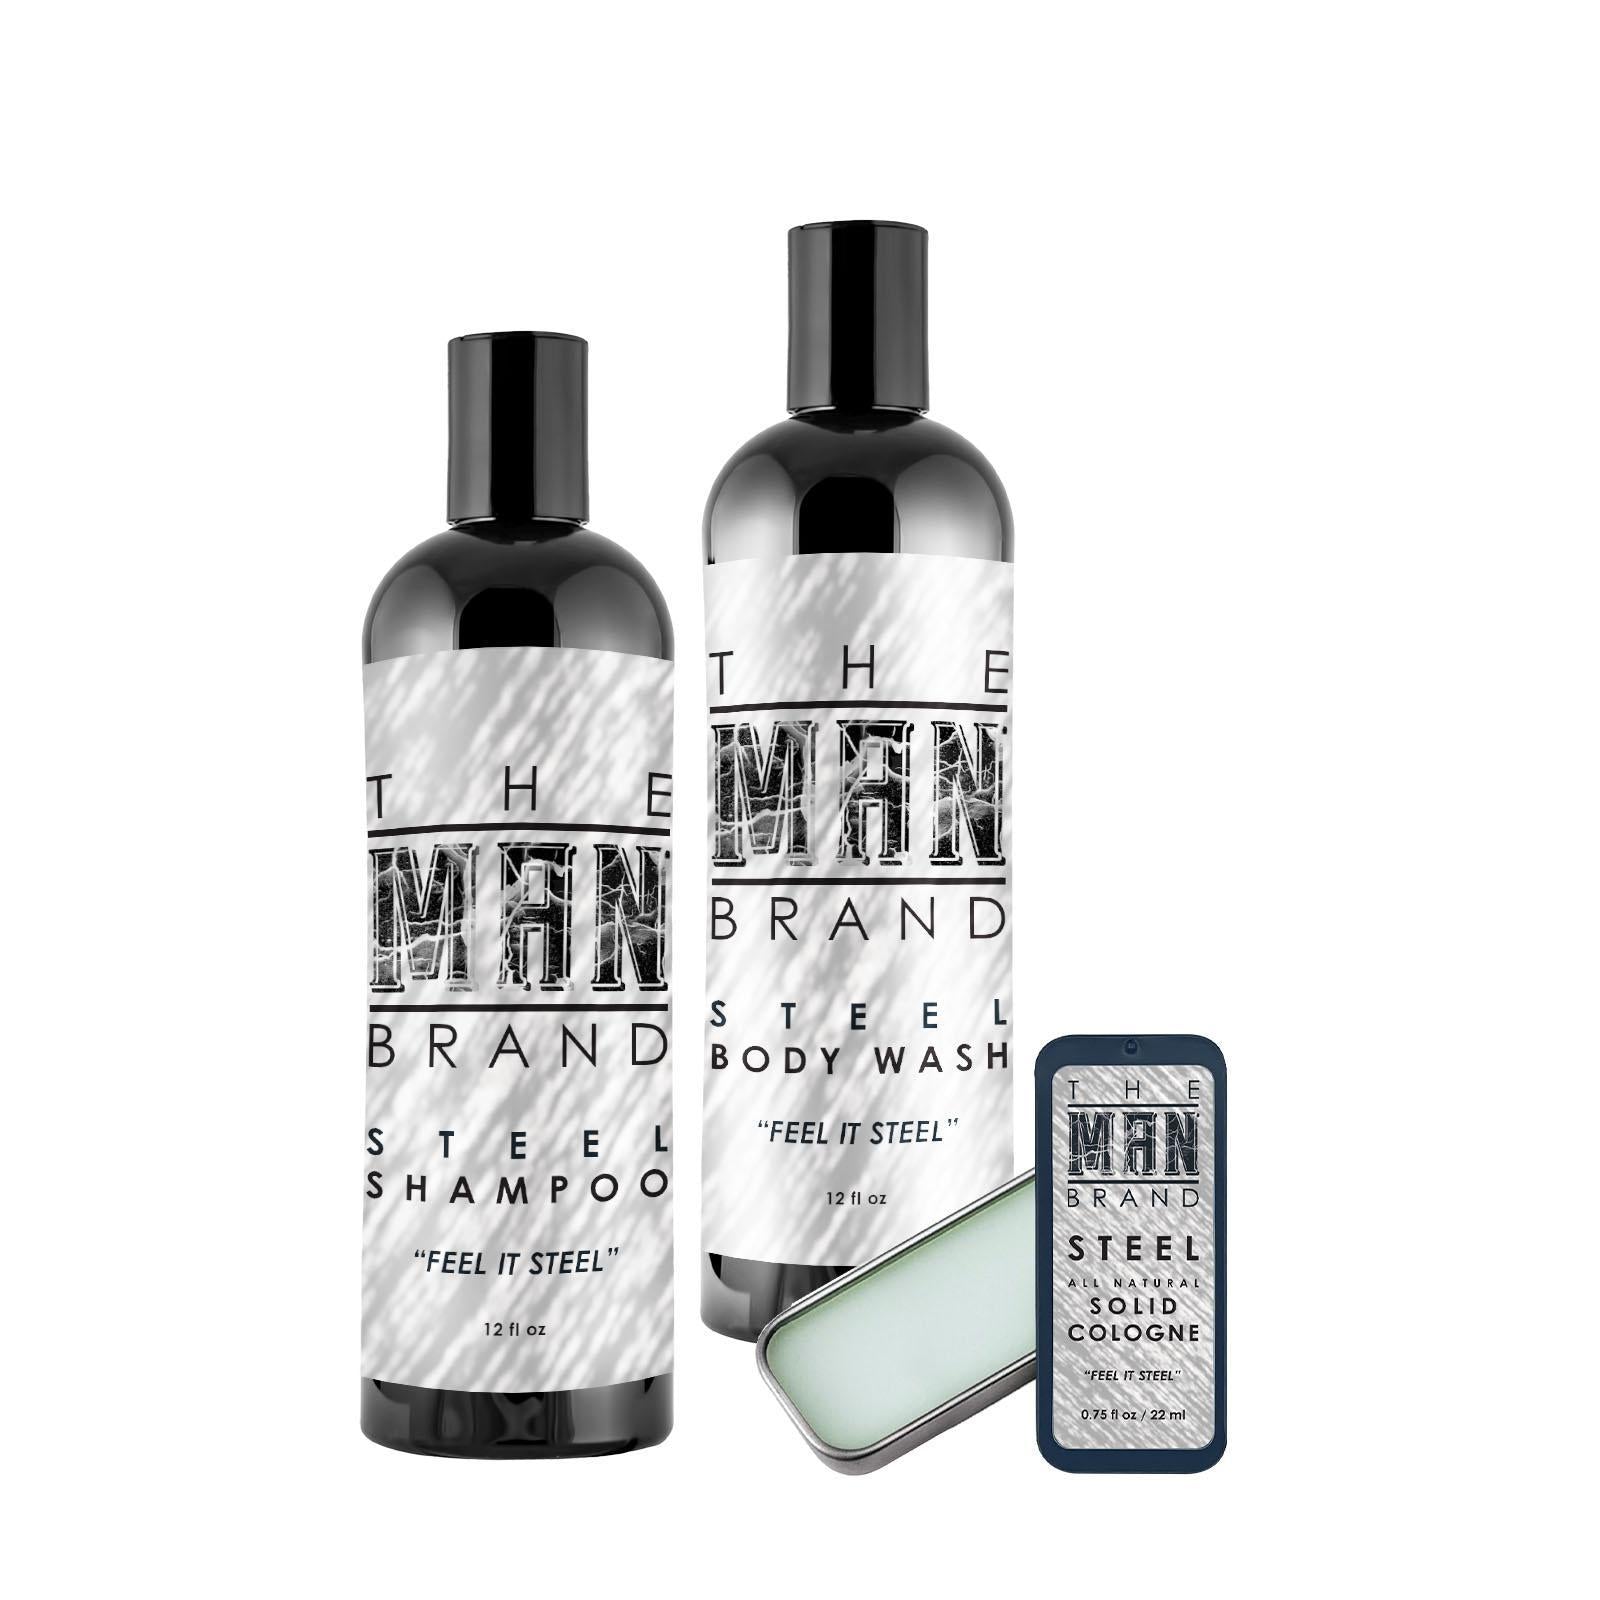 Triple Play Men's Grooming Kit: Shampoo, Body Wash, and Solid Cologne